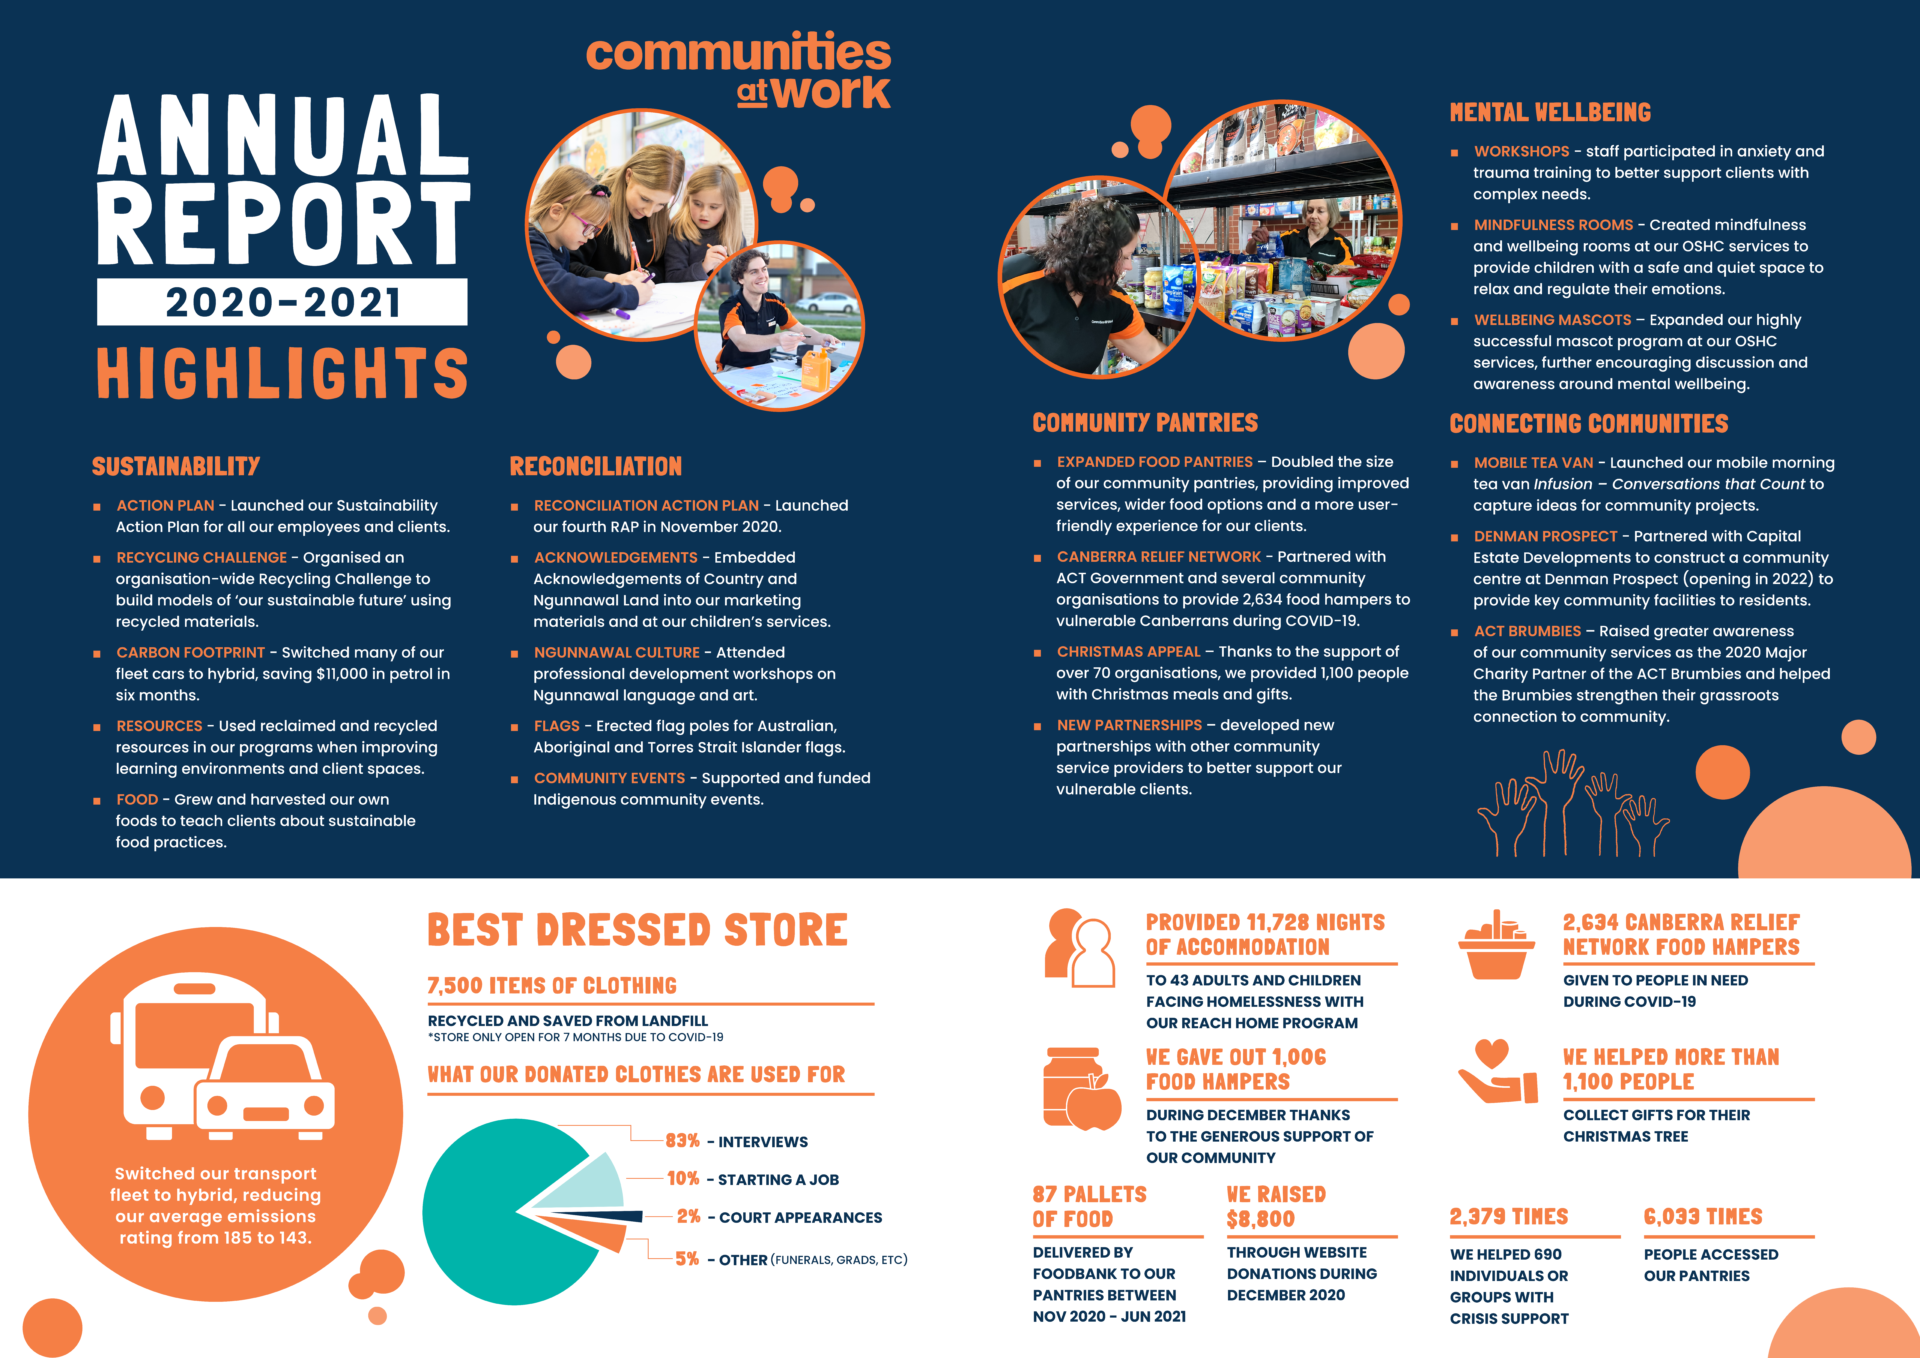 2020-21 Communities at Work Annual Report Highlights